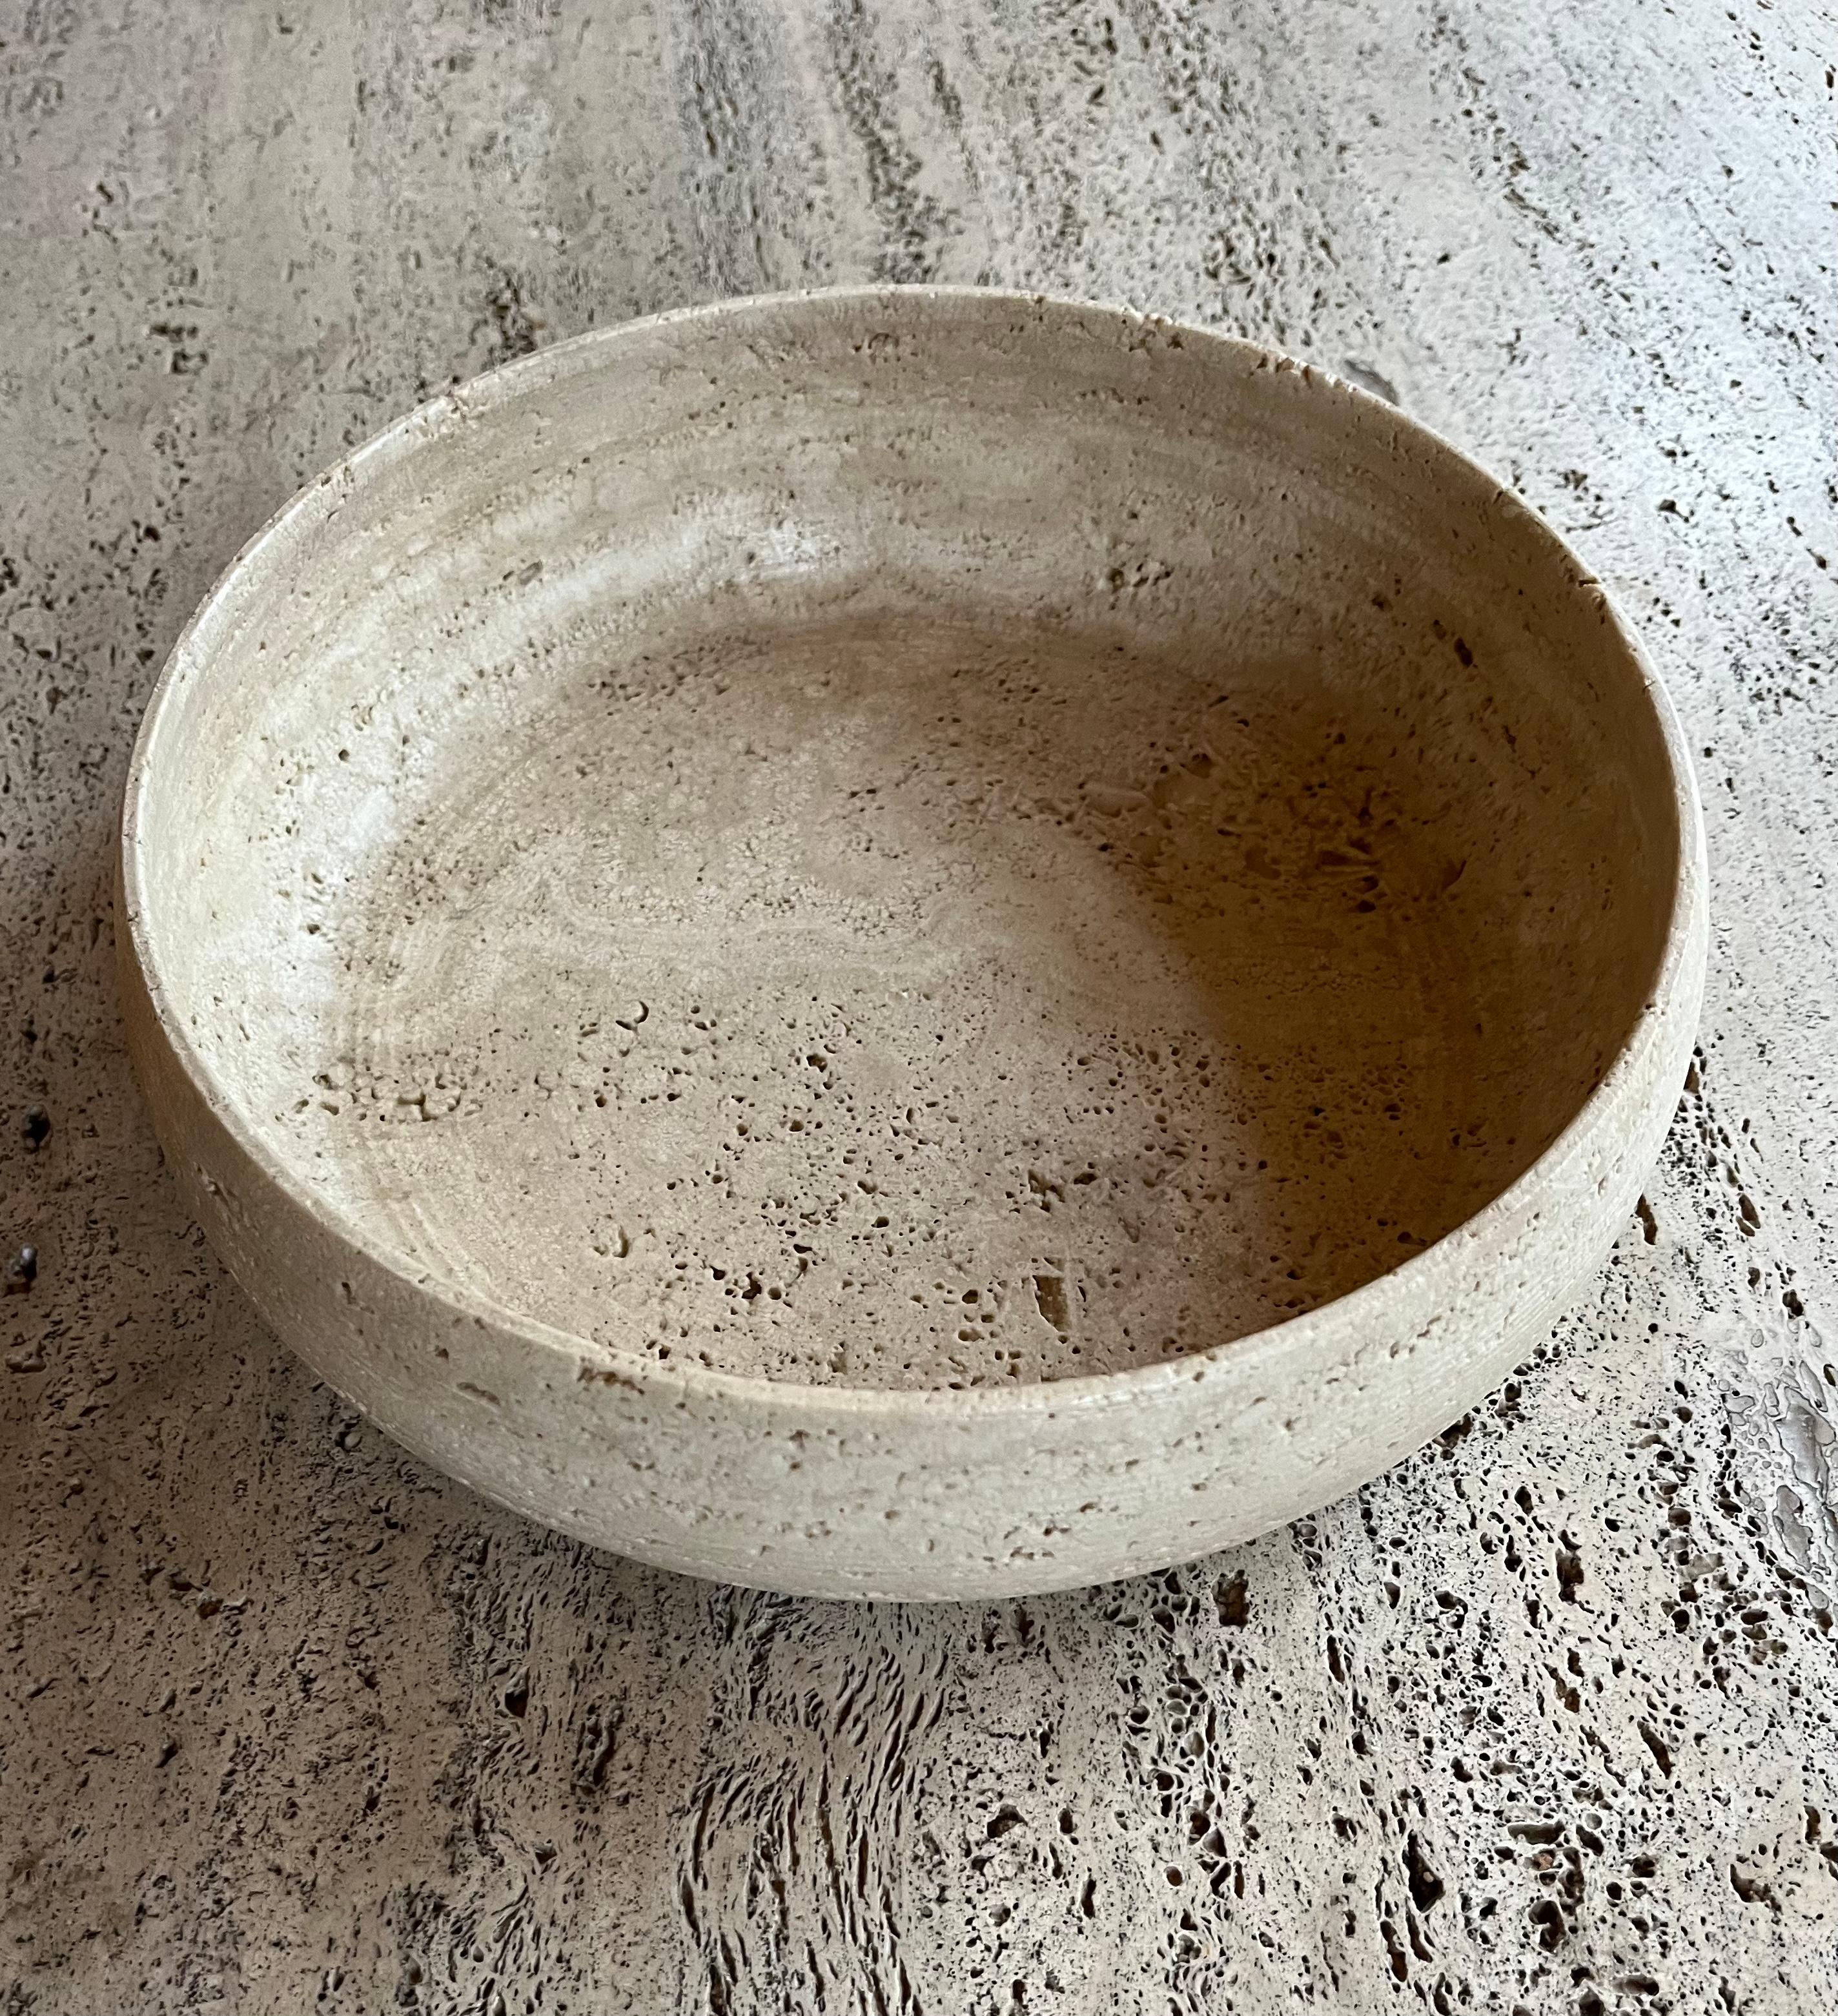 Large unfilled travertine bowl by Ducci. Italian c.1970’s